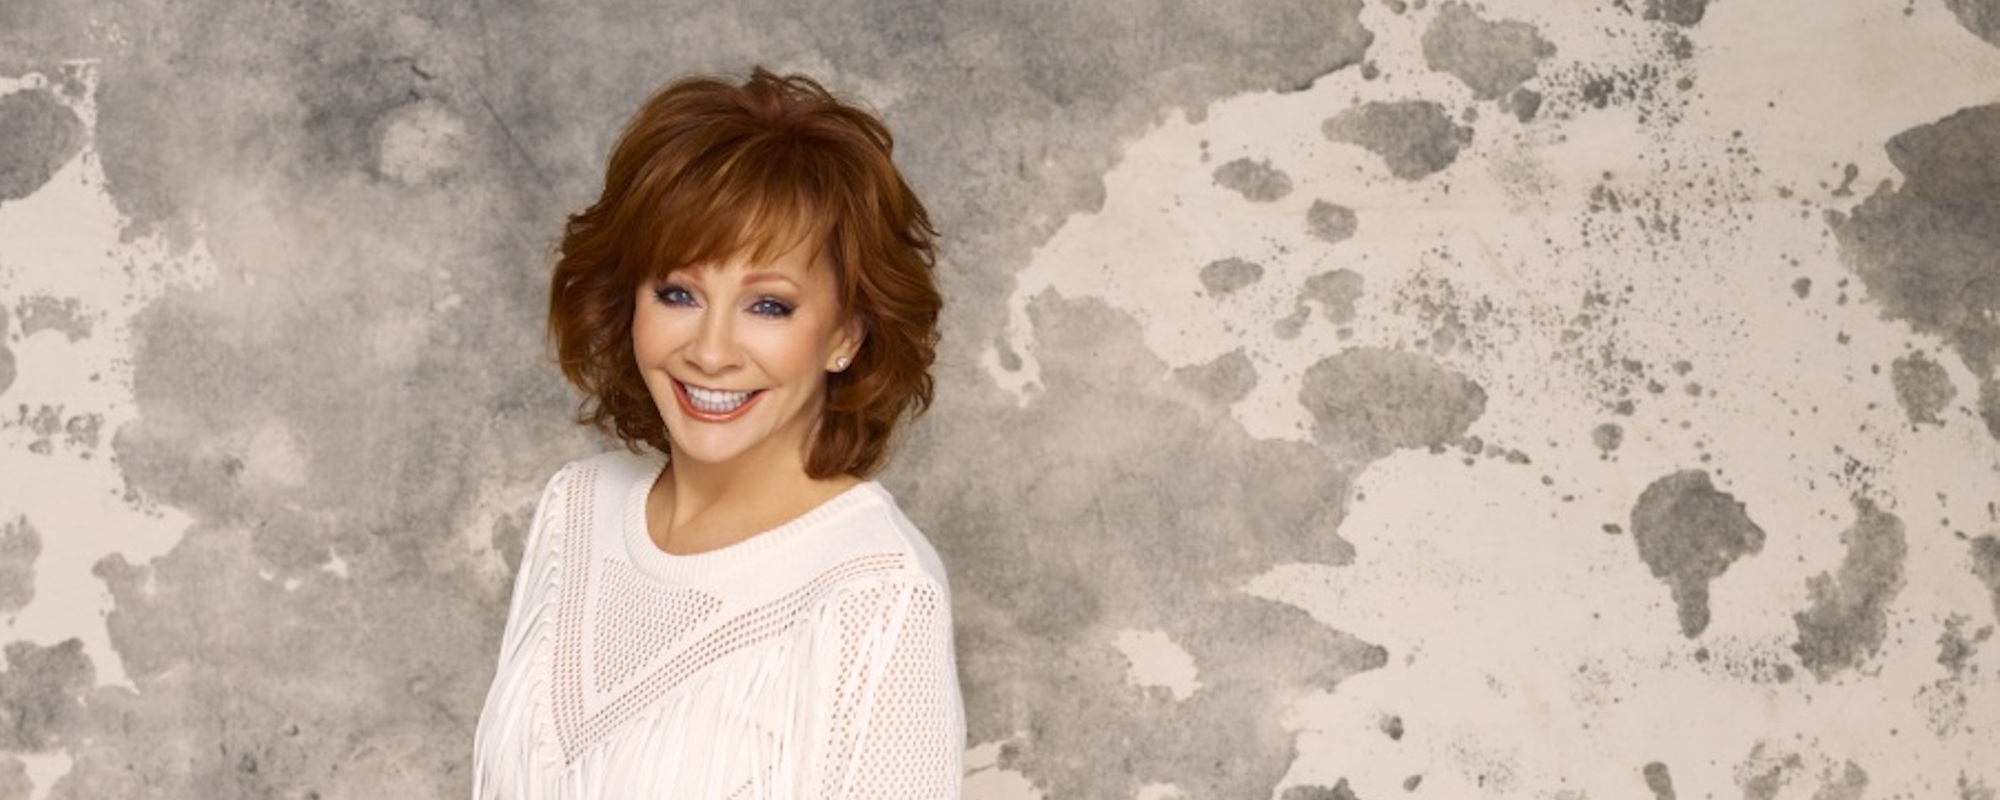 Reba McEntire, Katy Perry, The Black Keys and More to Perform at 2022 CMA Awards